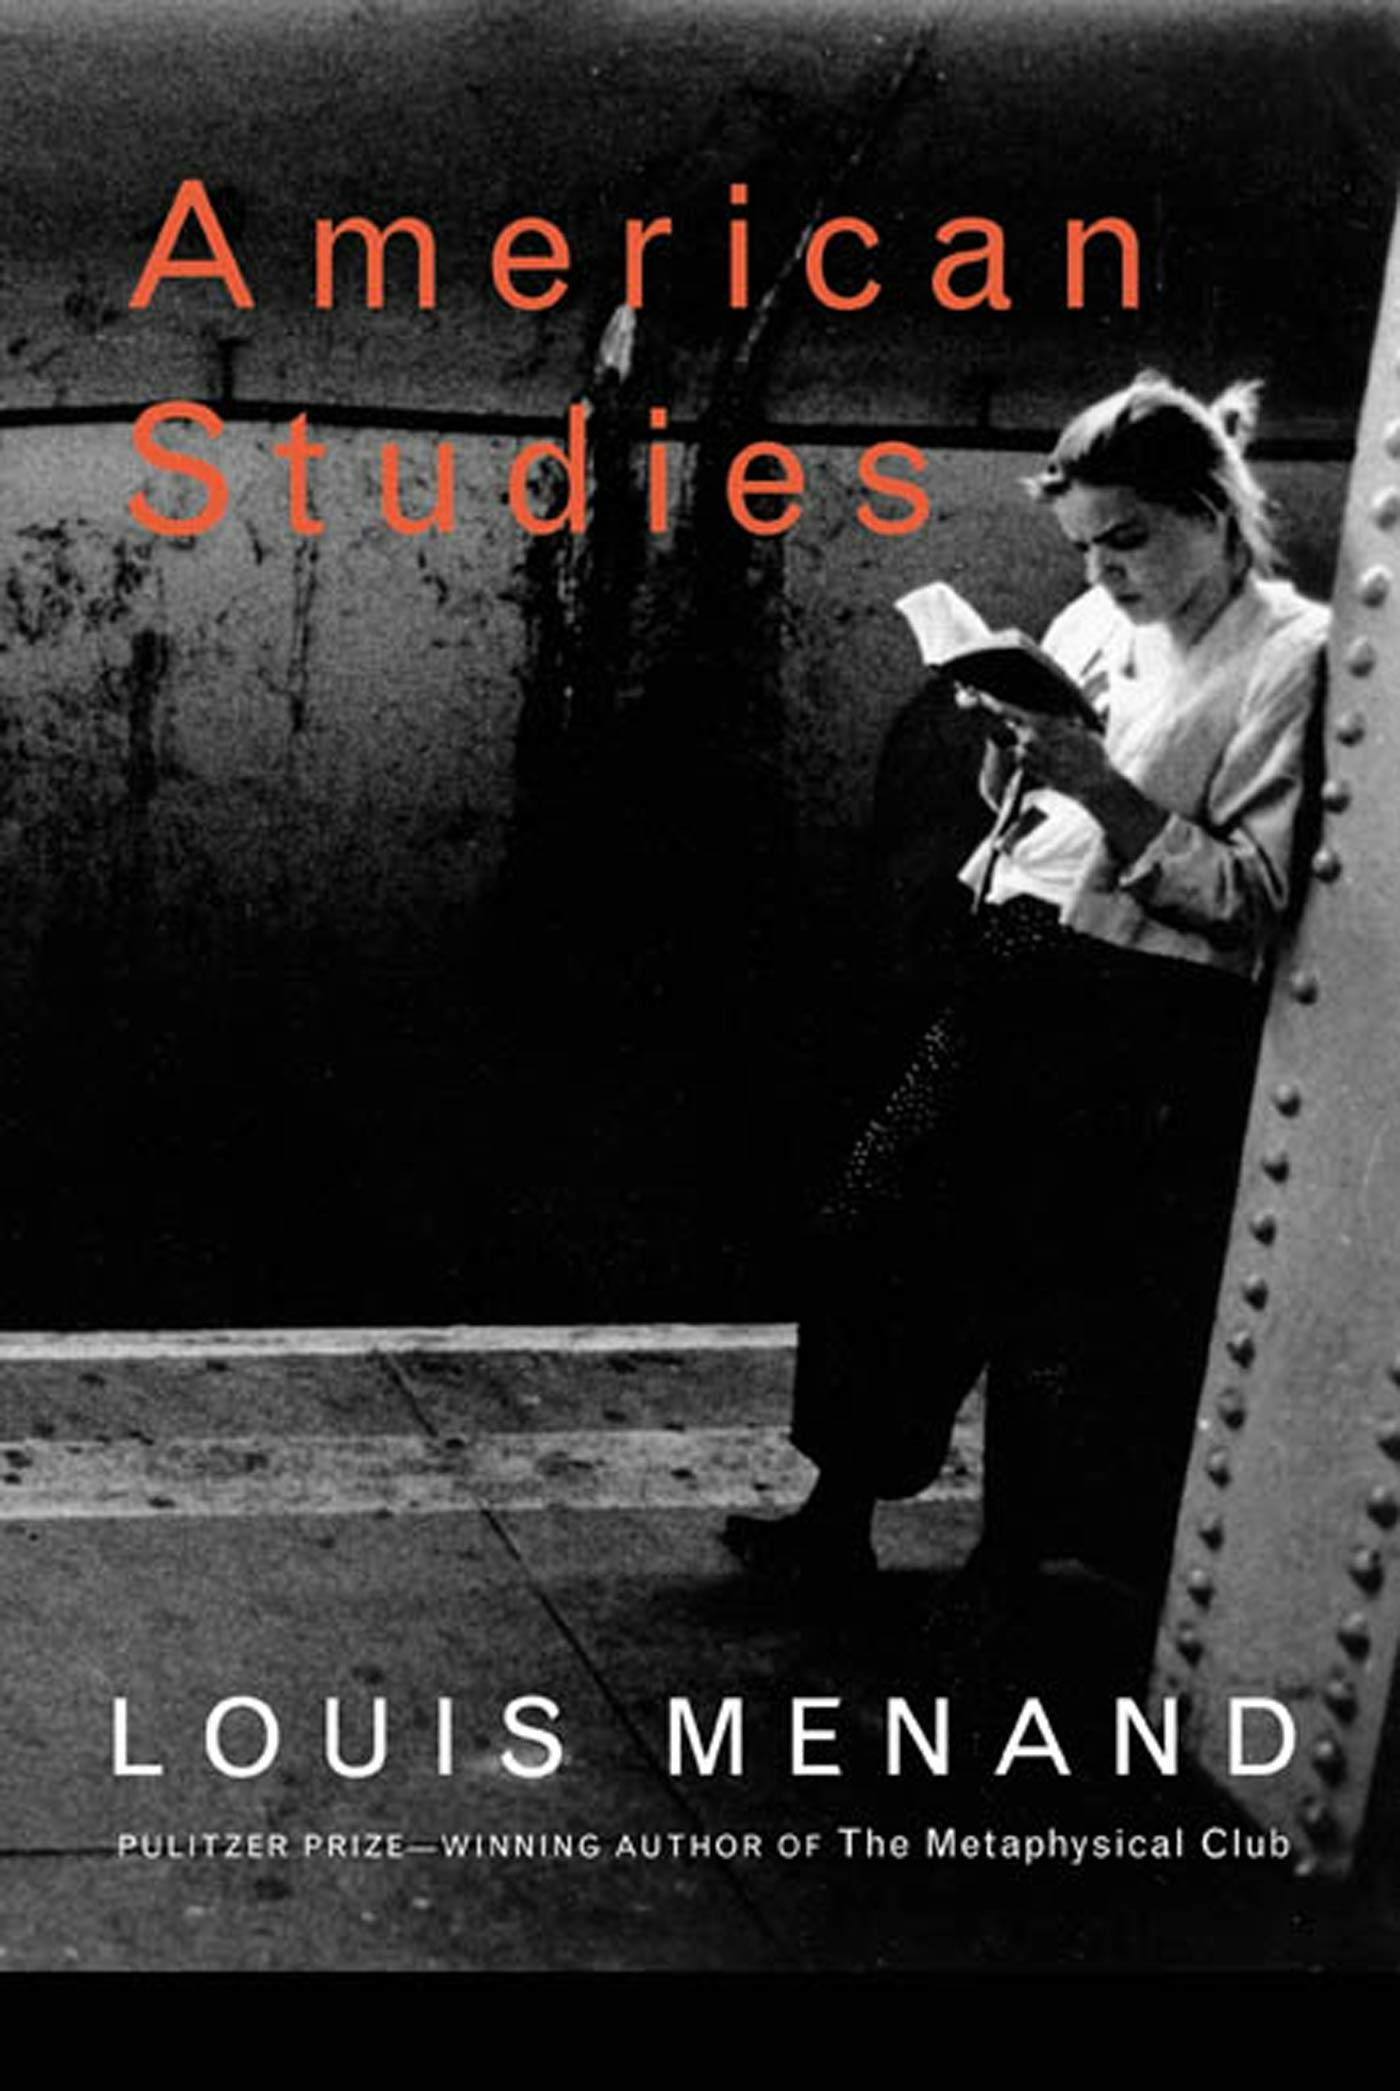 THE METAPHYSICAL CLUB. A Story Of Ideas In America. by Menand